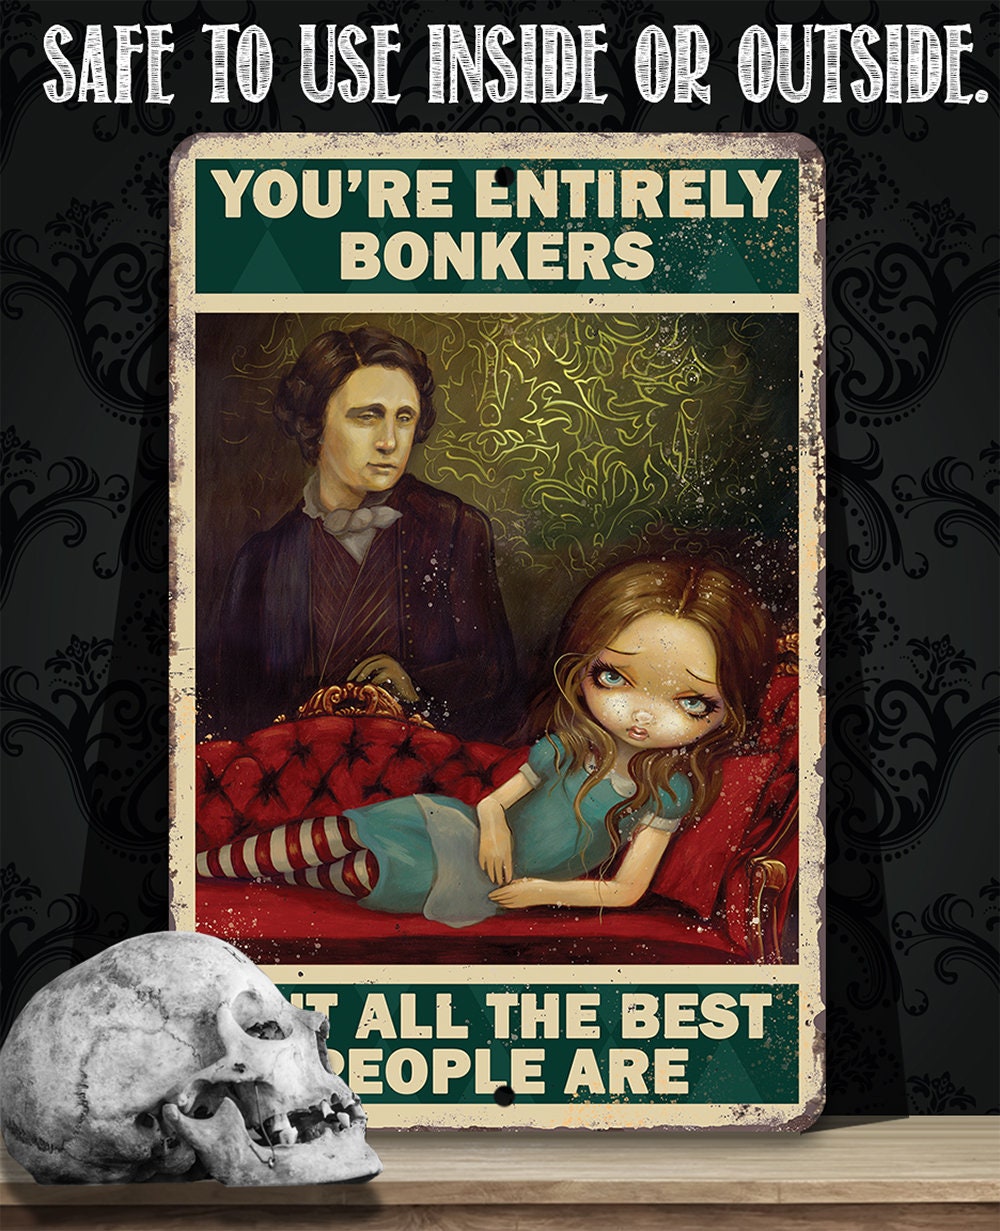 You're Entirely Bonkers But All The Best People Are - 8" x 12" or 12" x 18" Aluminum Tin Awesome Gothic Metal Poster Lone Star Art 